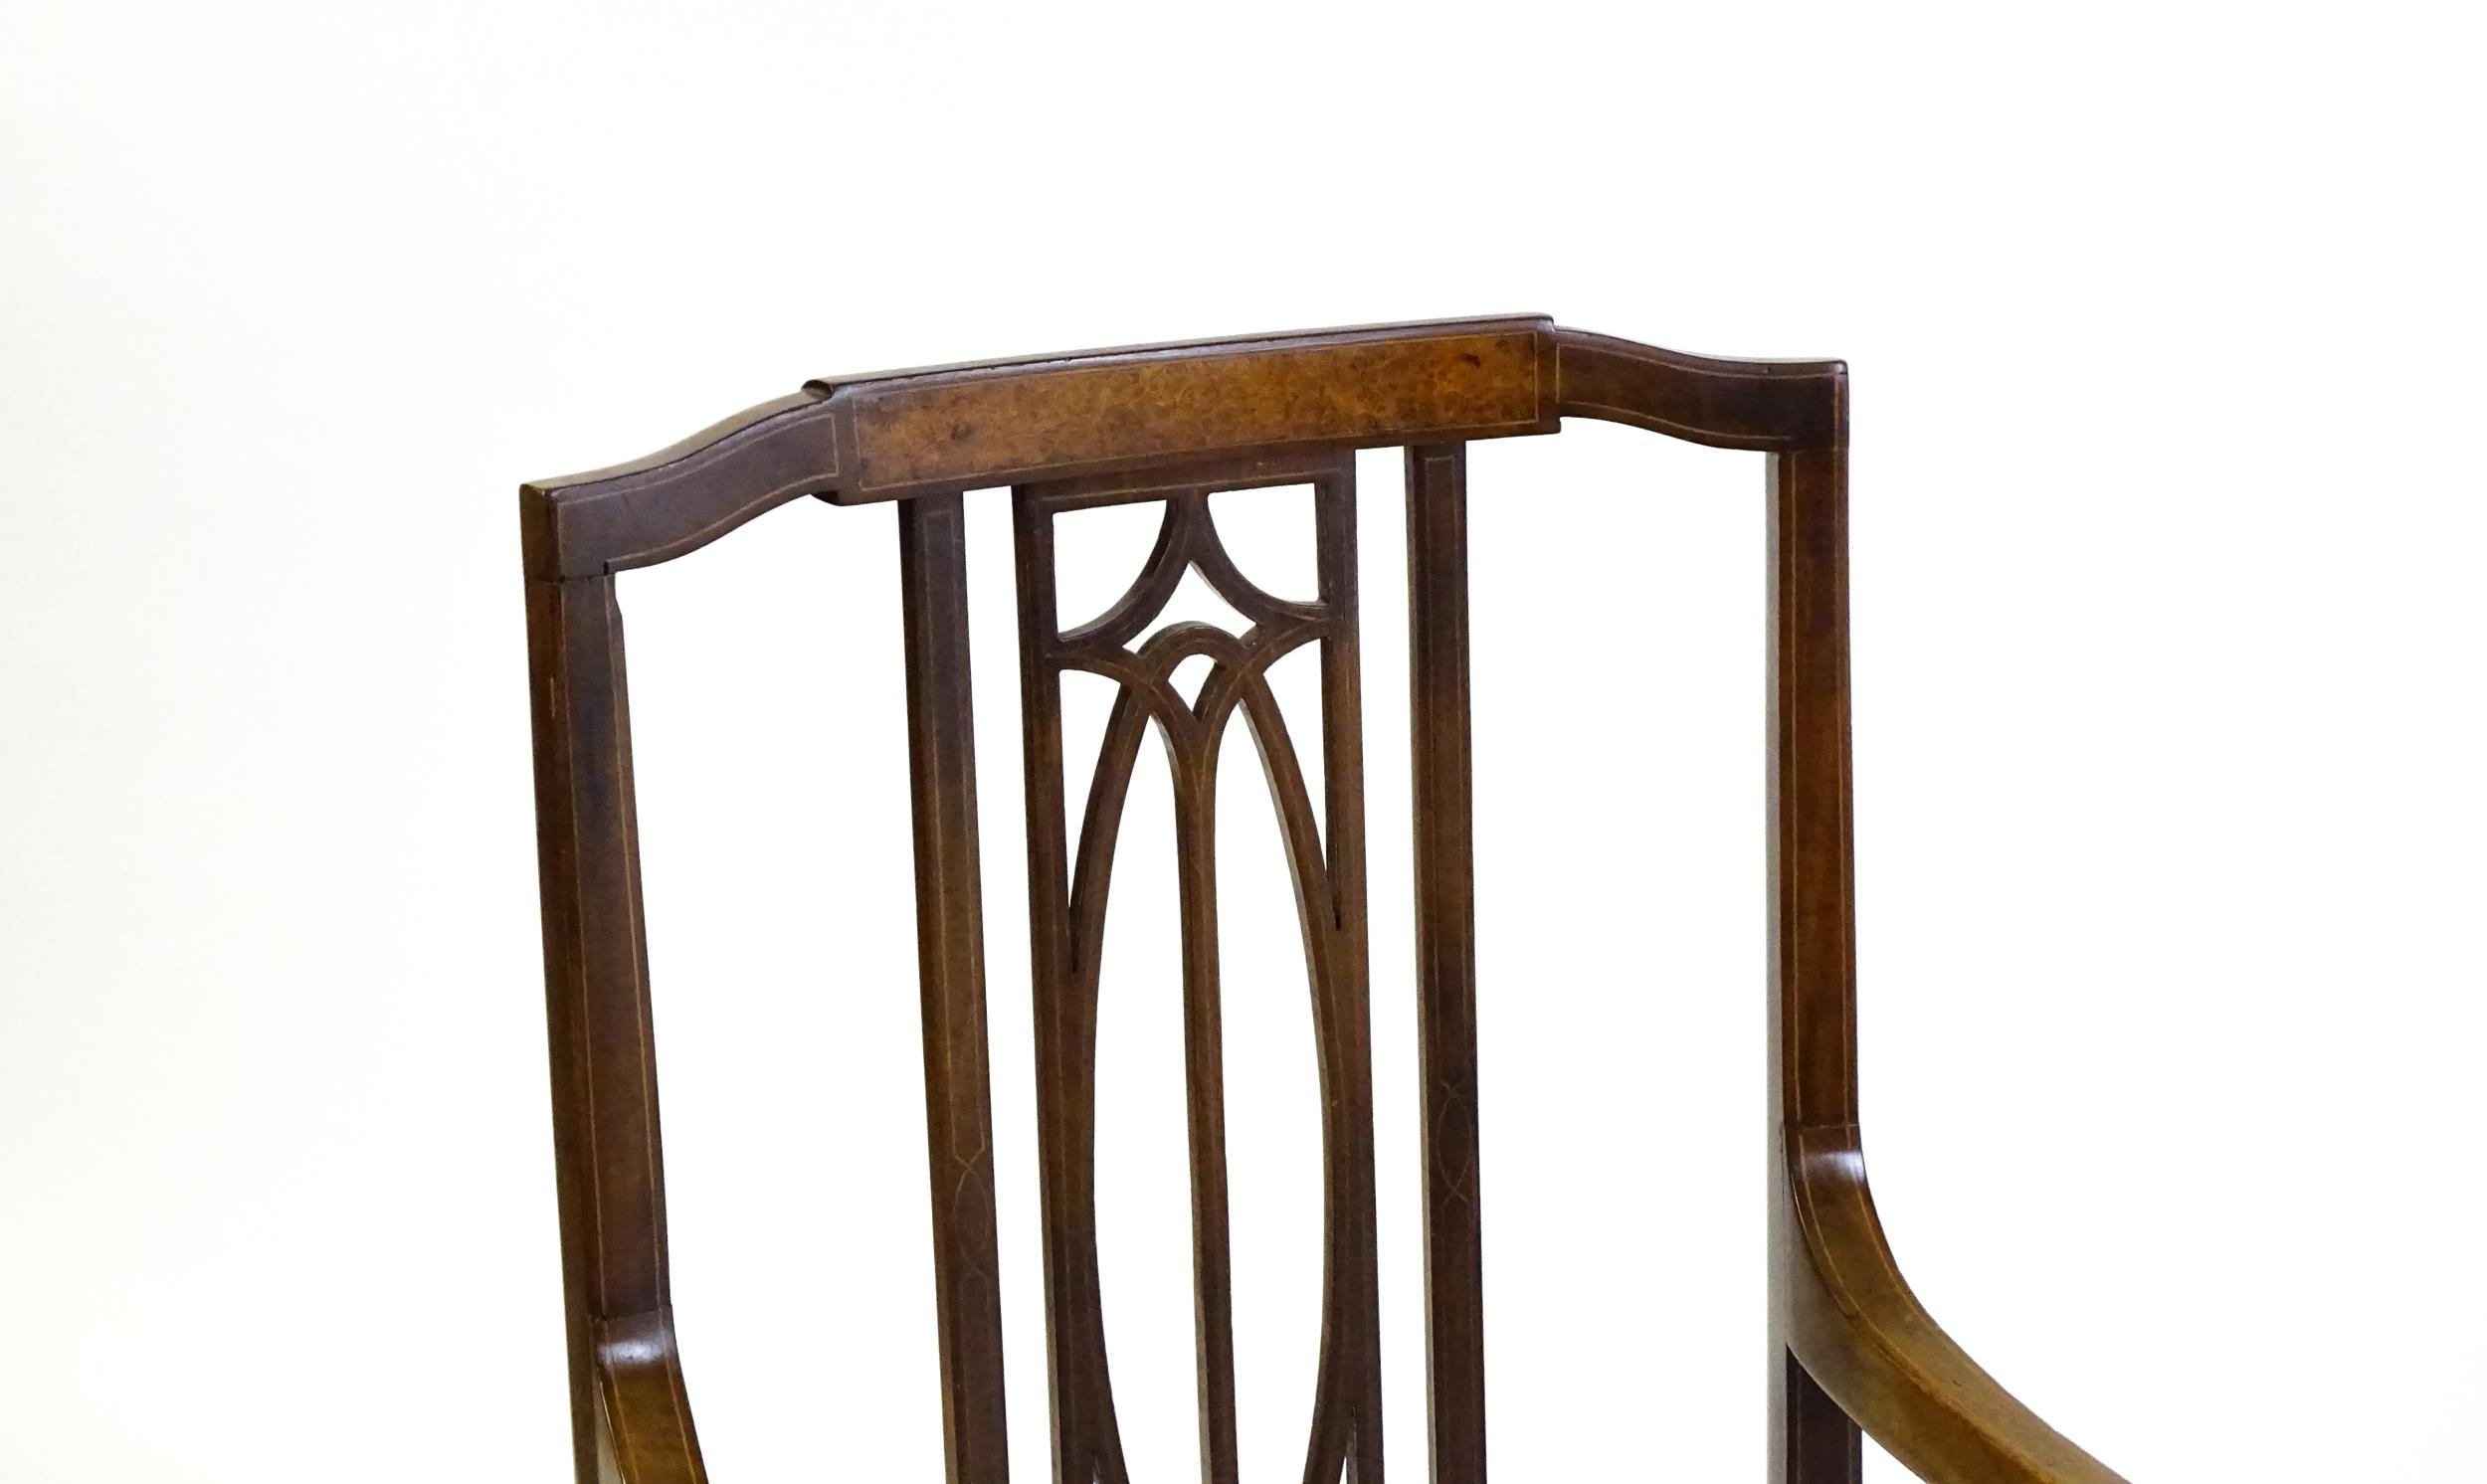 An Edwardian elbow chair with a burr walnut veneered top rail, a pierced back splat and swept arms - Image 3 of 5